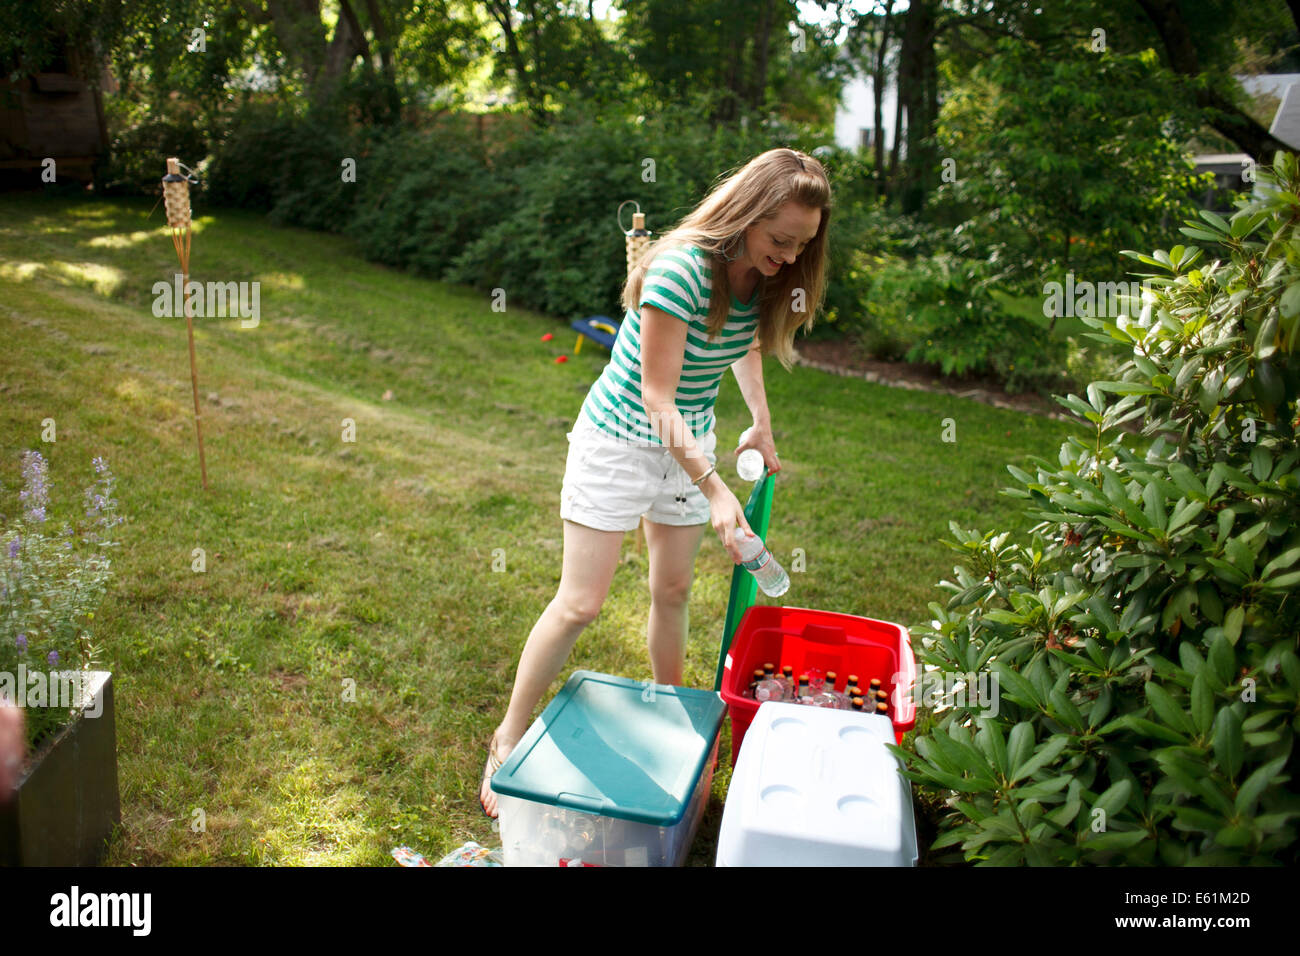 Woman Taking Bottle of Water from Ice Chest at Backyard Barbeque Stock Photo